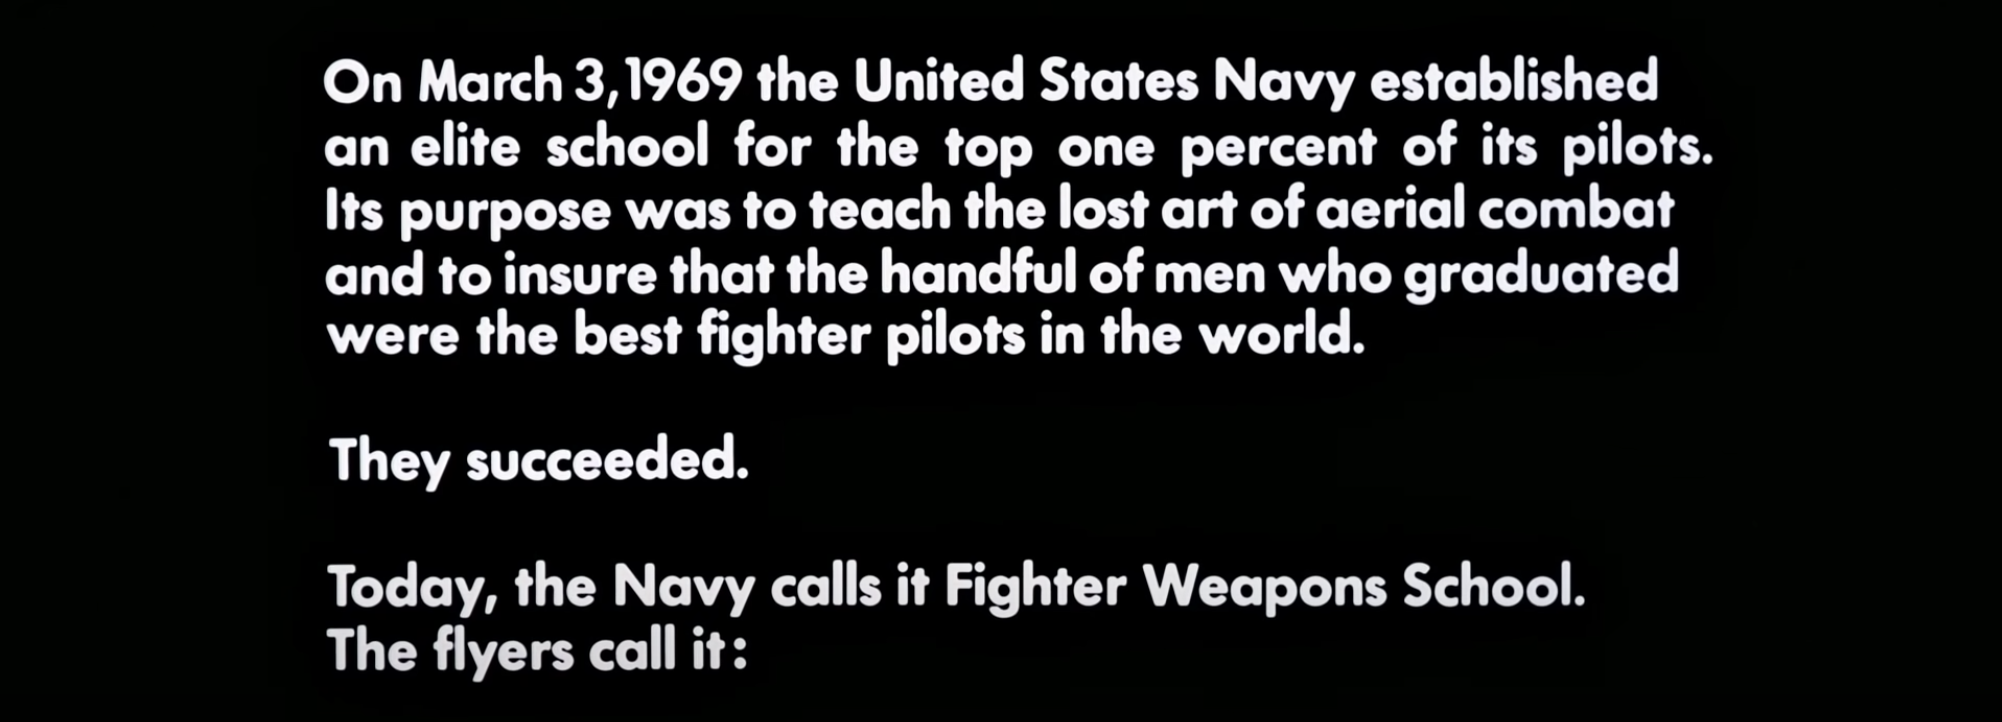 The title card says that in 1969, the US Navy created an elite school for the top 1% of its pilots with the goal of making them the best fighter pilots in the world